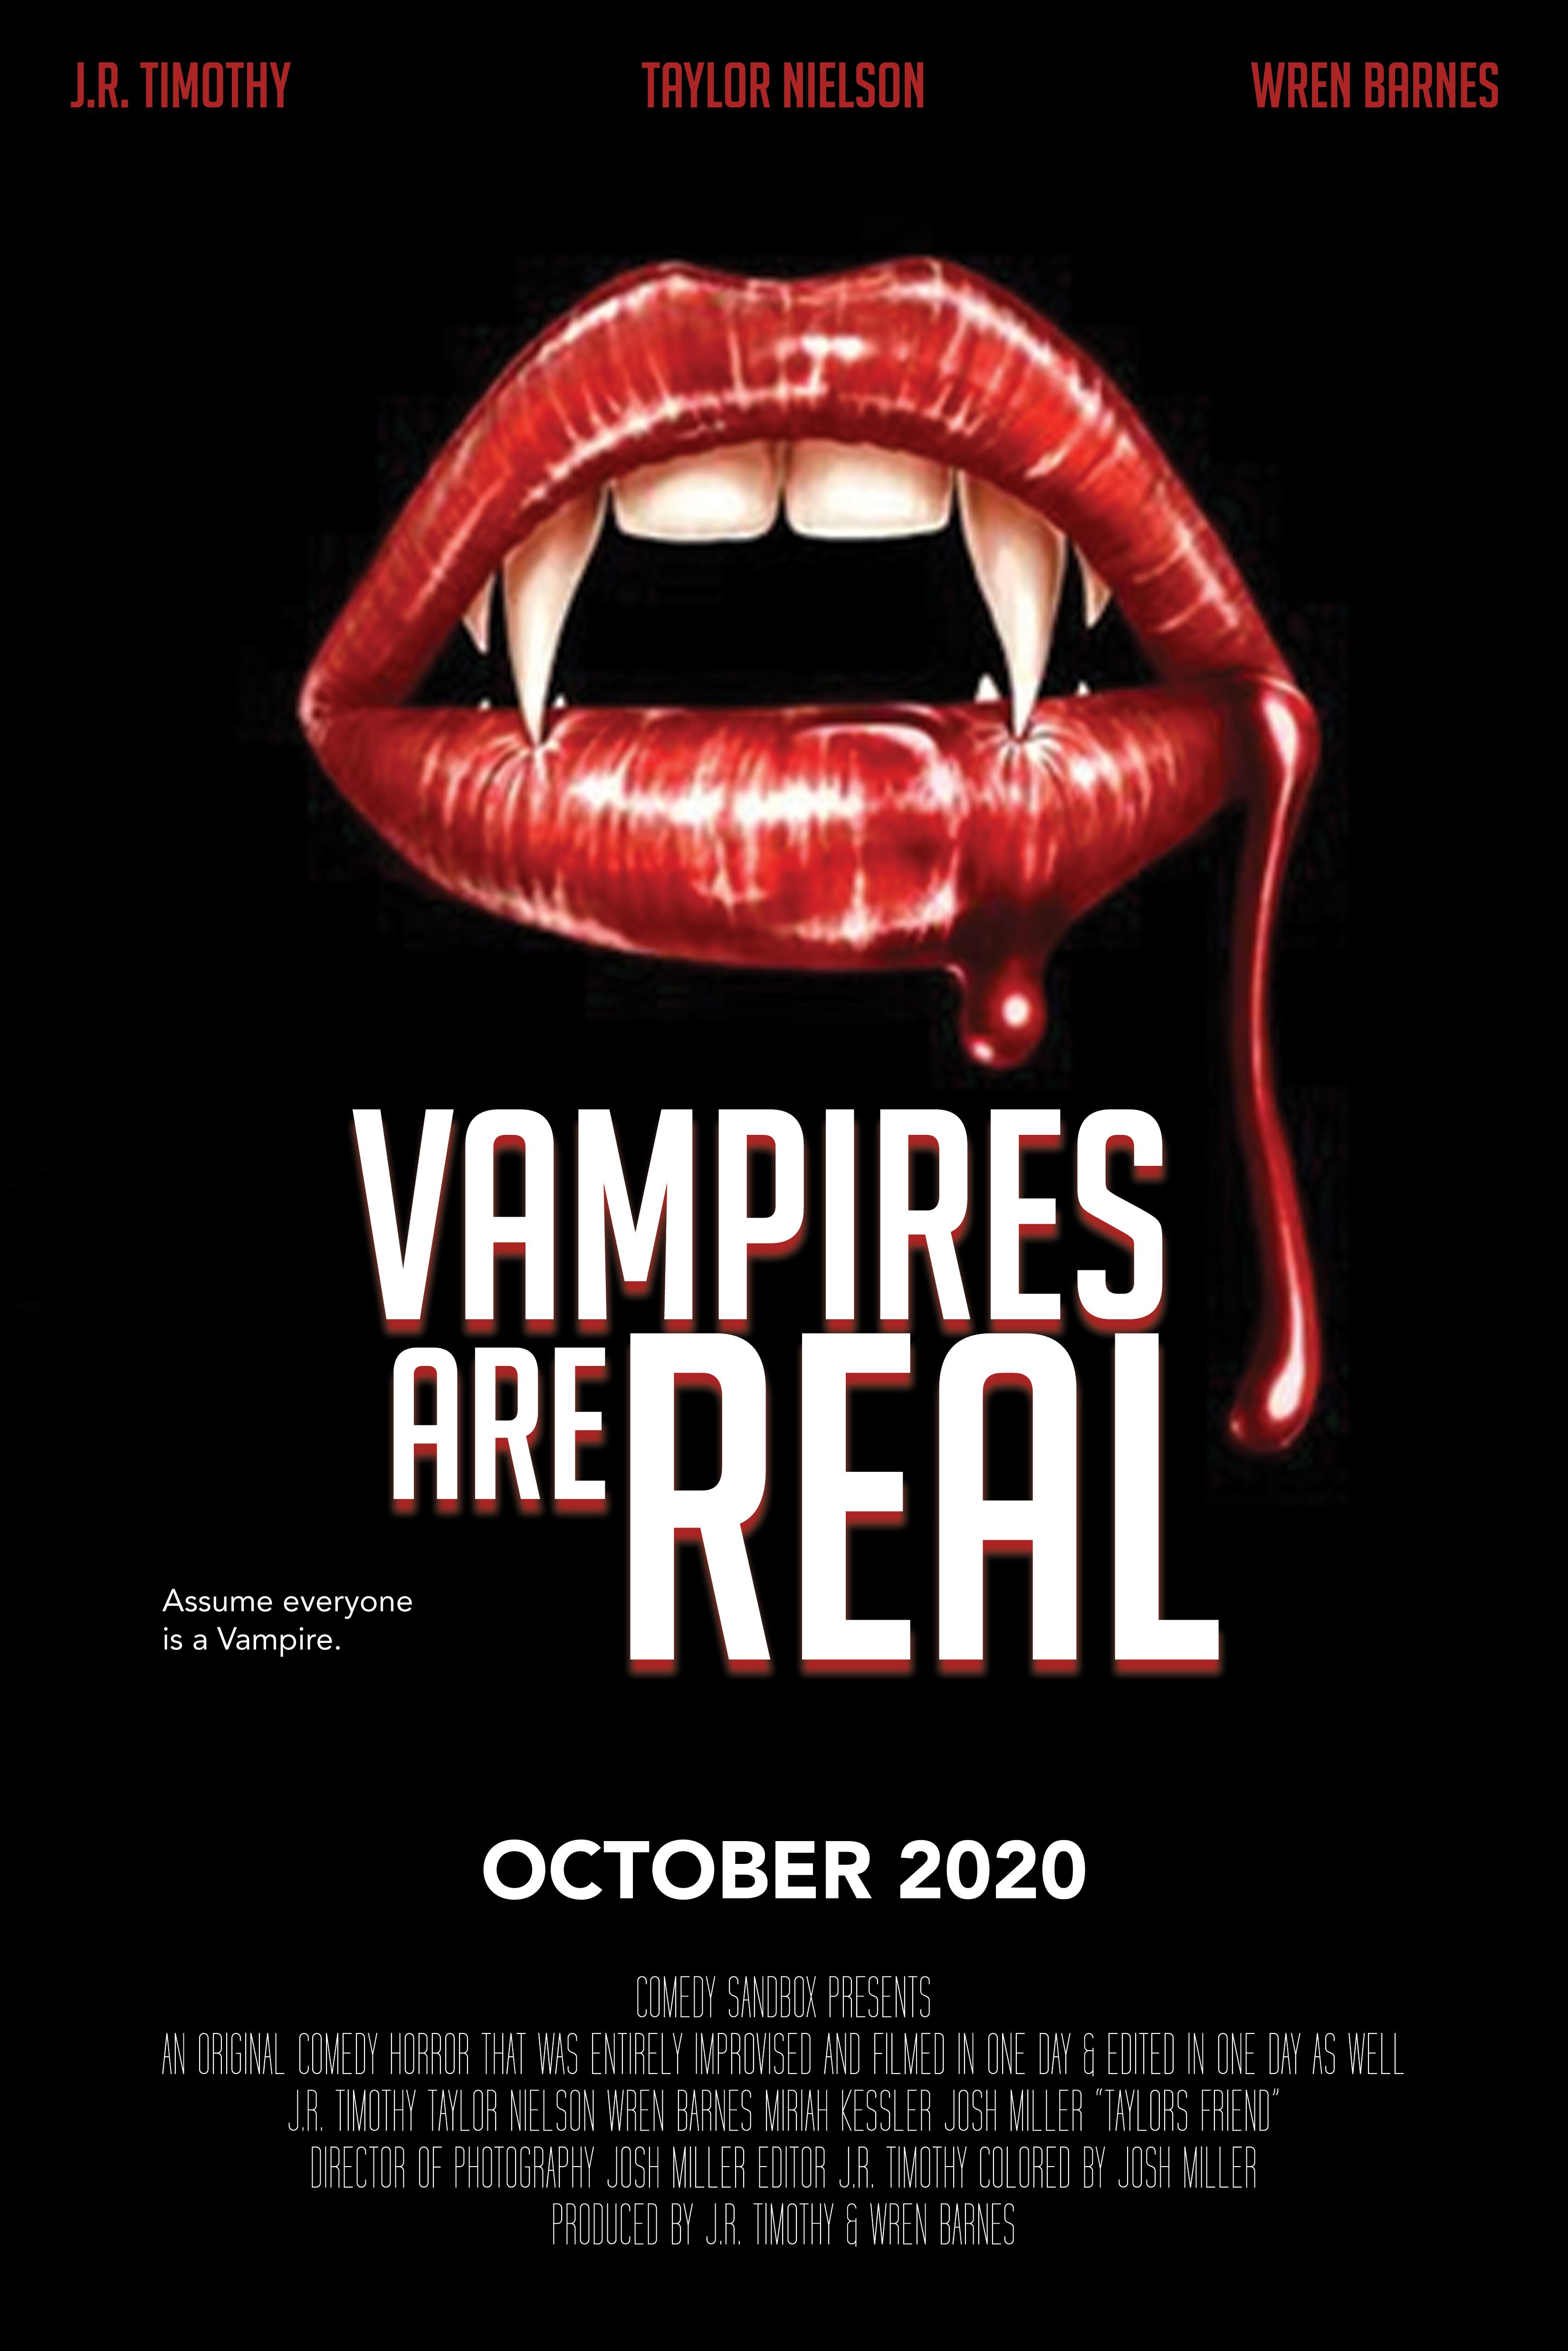 Vampires Are Real (2020)